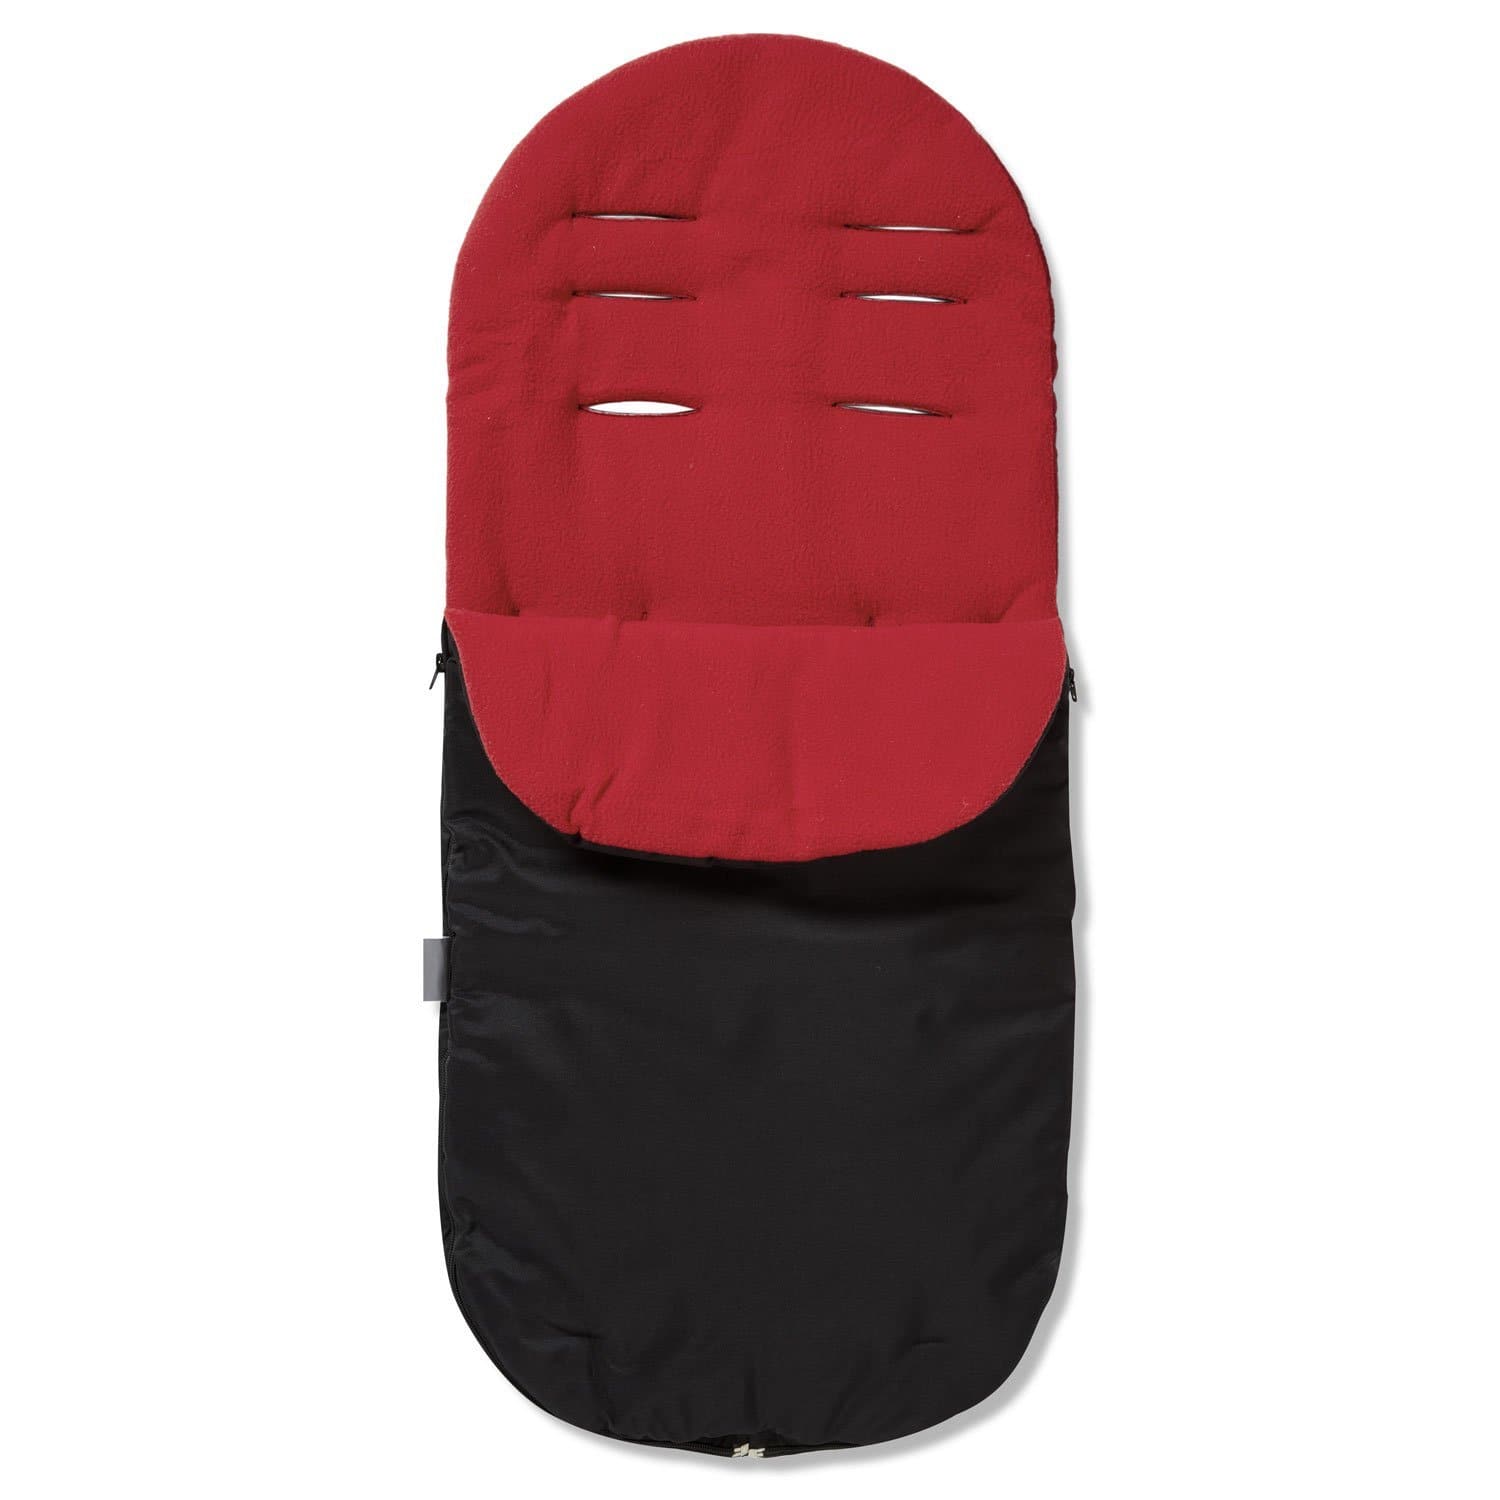 Footmuff / Cosy Toes Compatible with Valco - Red / Fits All Models | For Your Little One